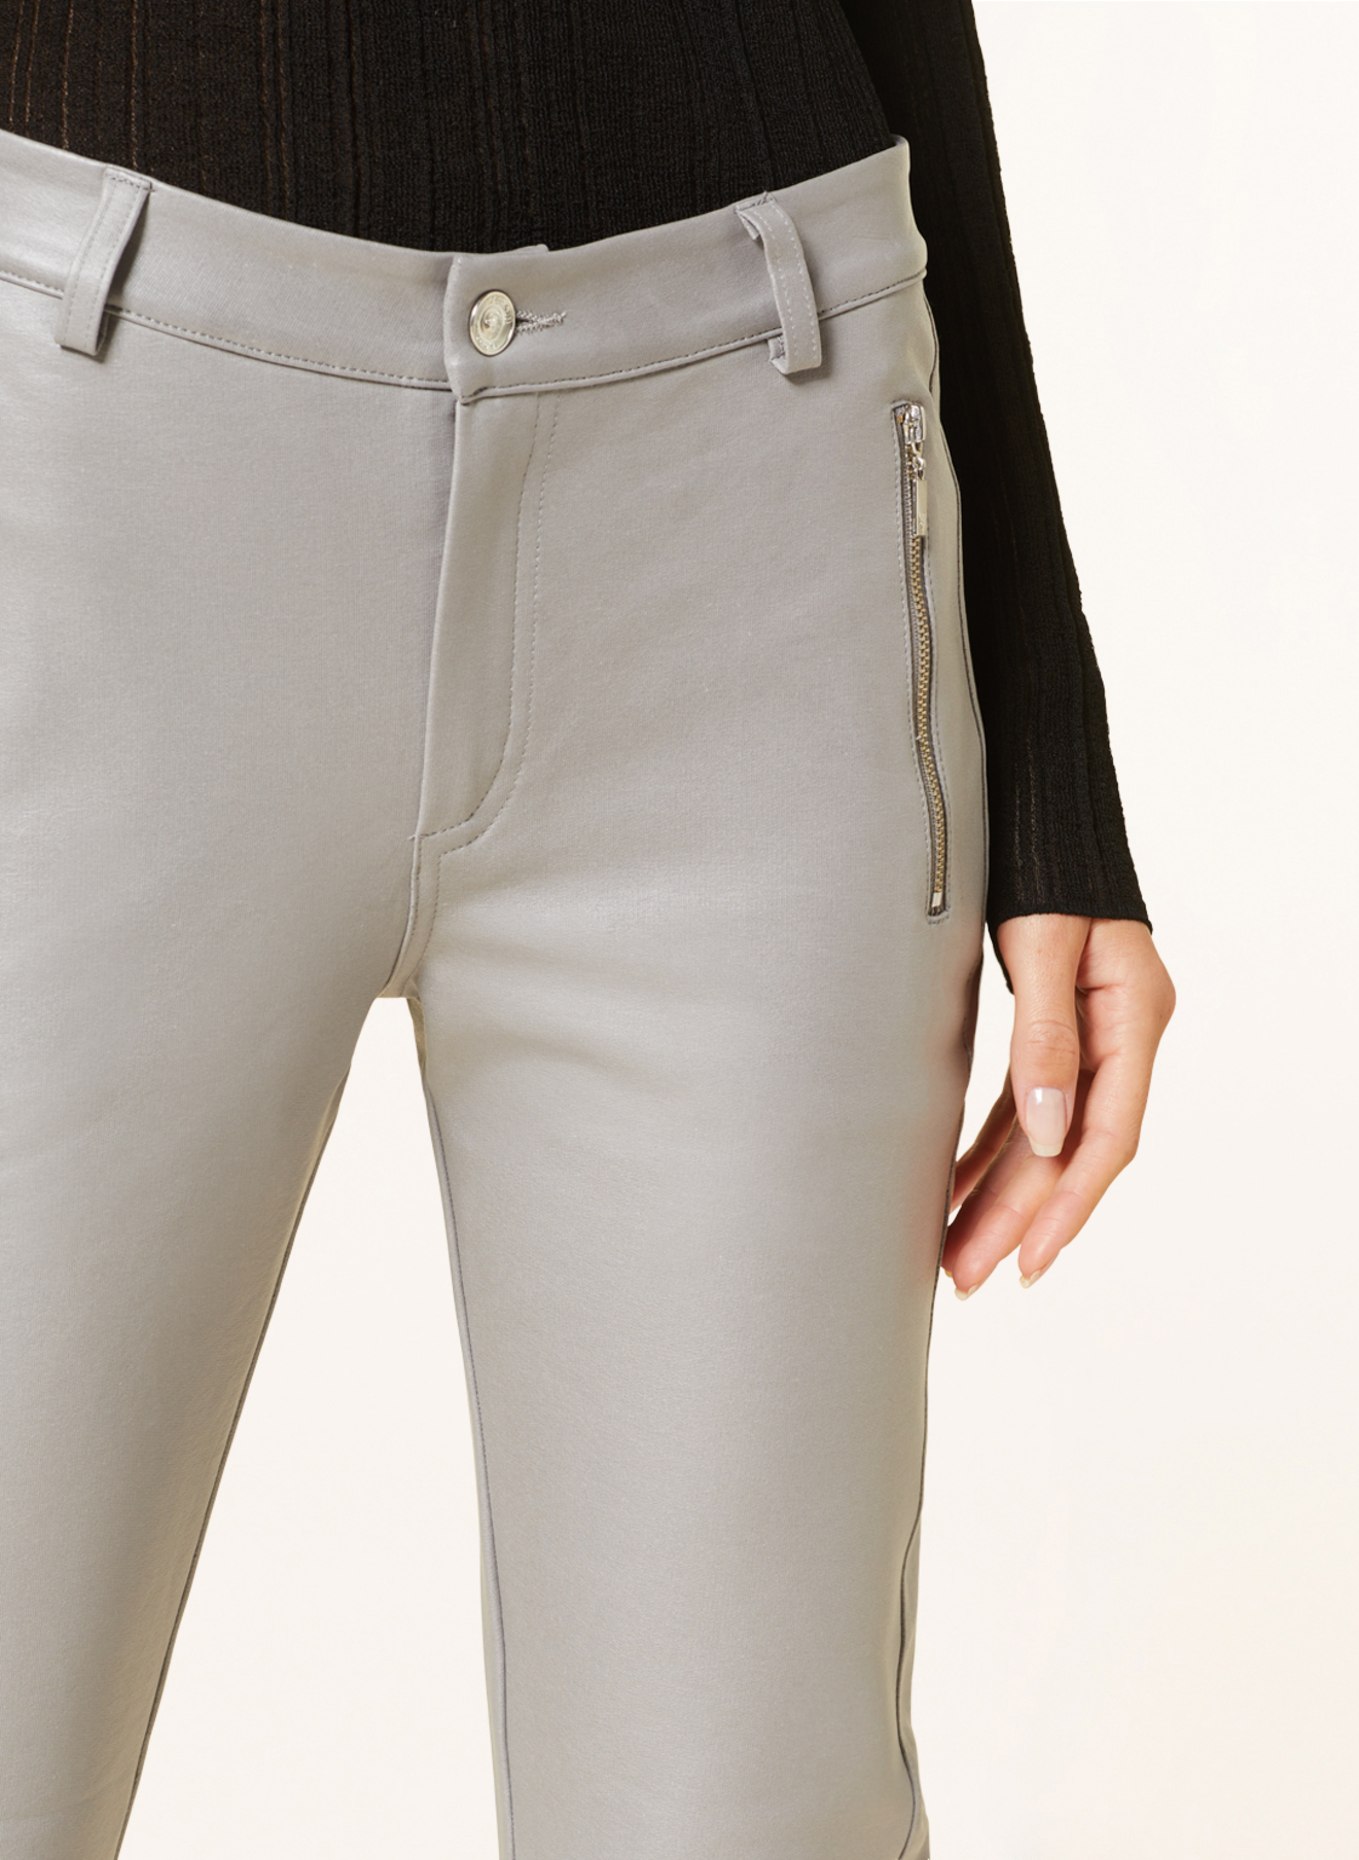 monari Pants in leather look, Color: LIGHT GRAY (Image 5)